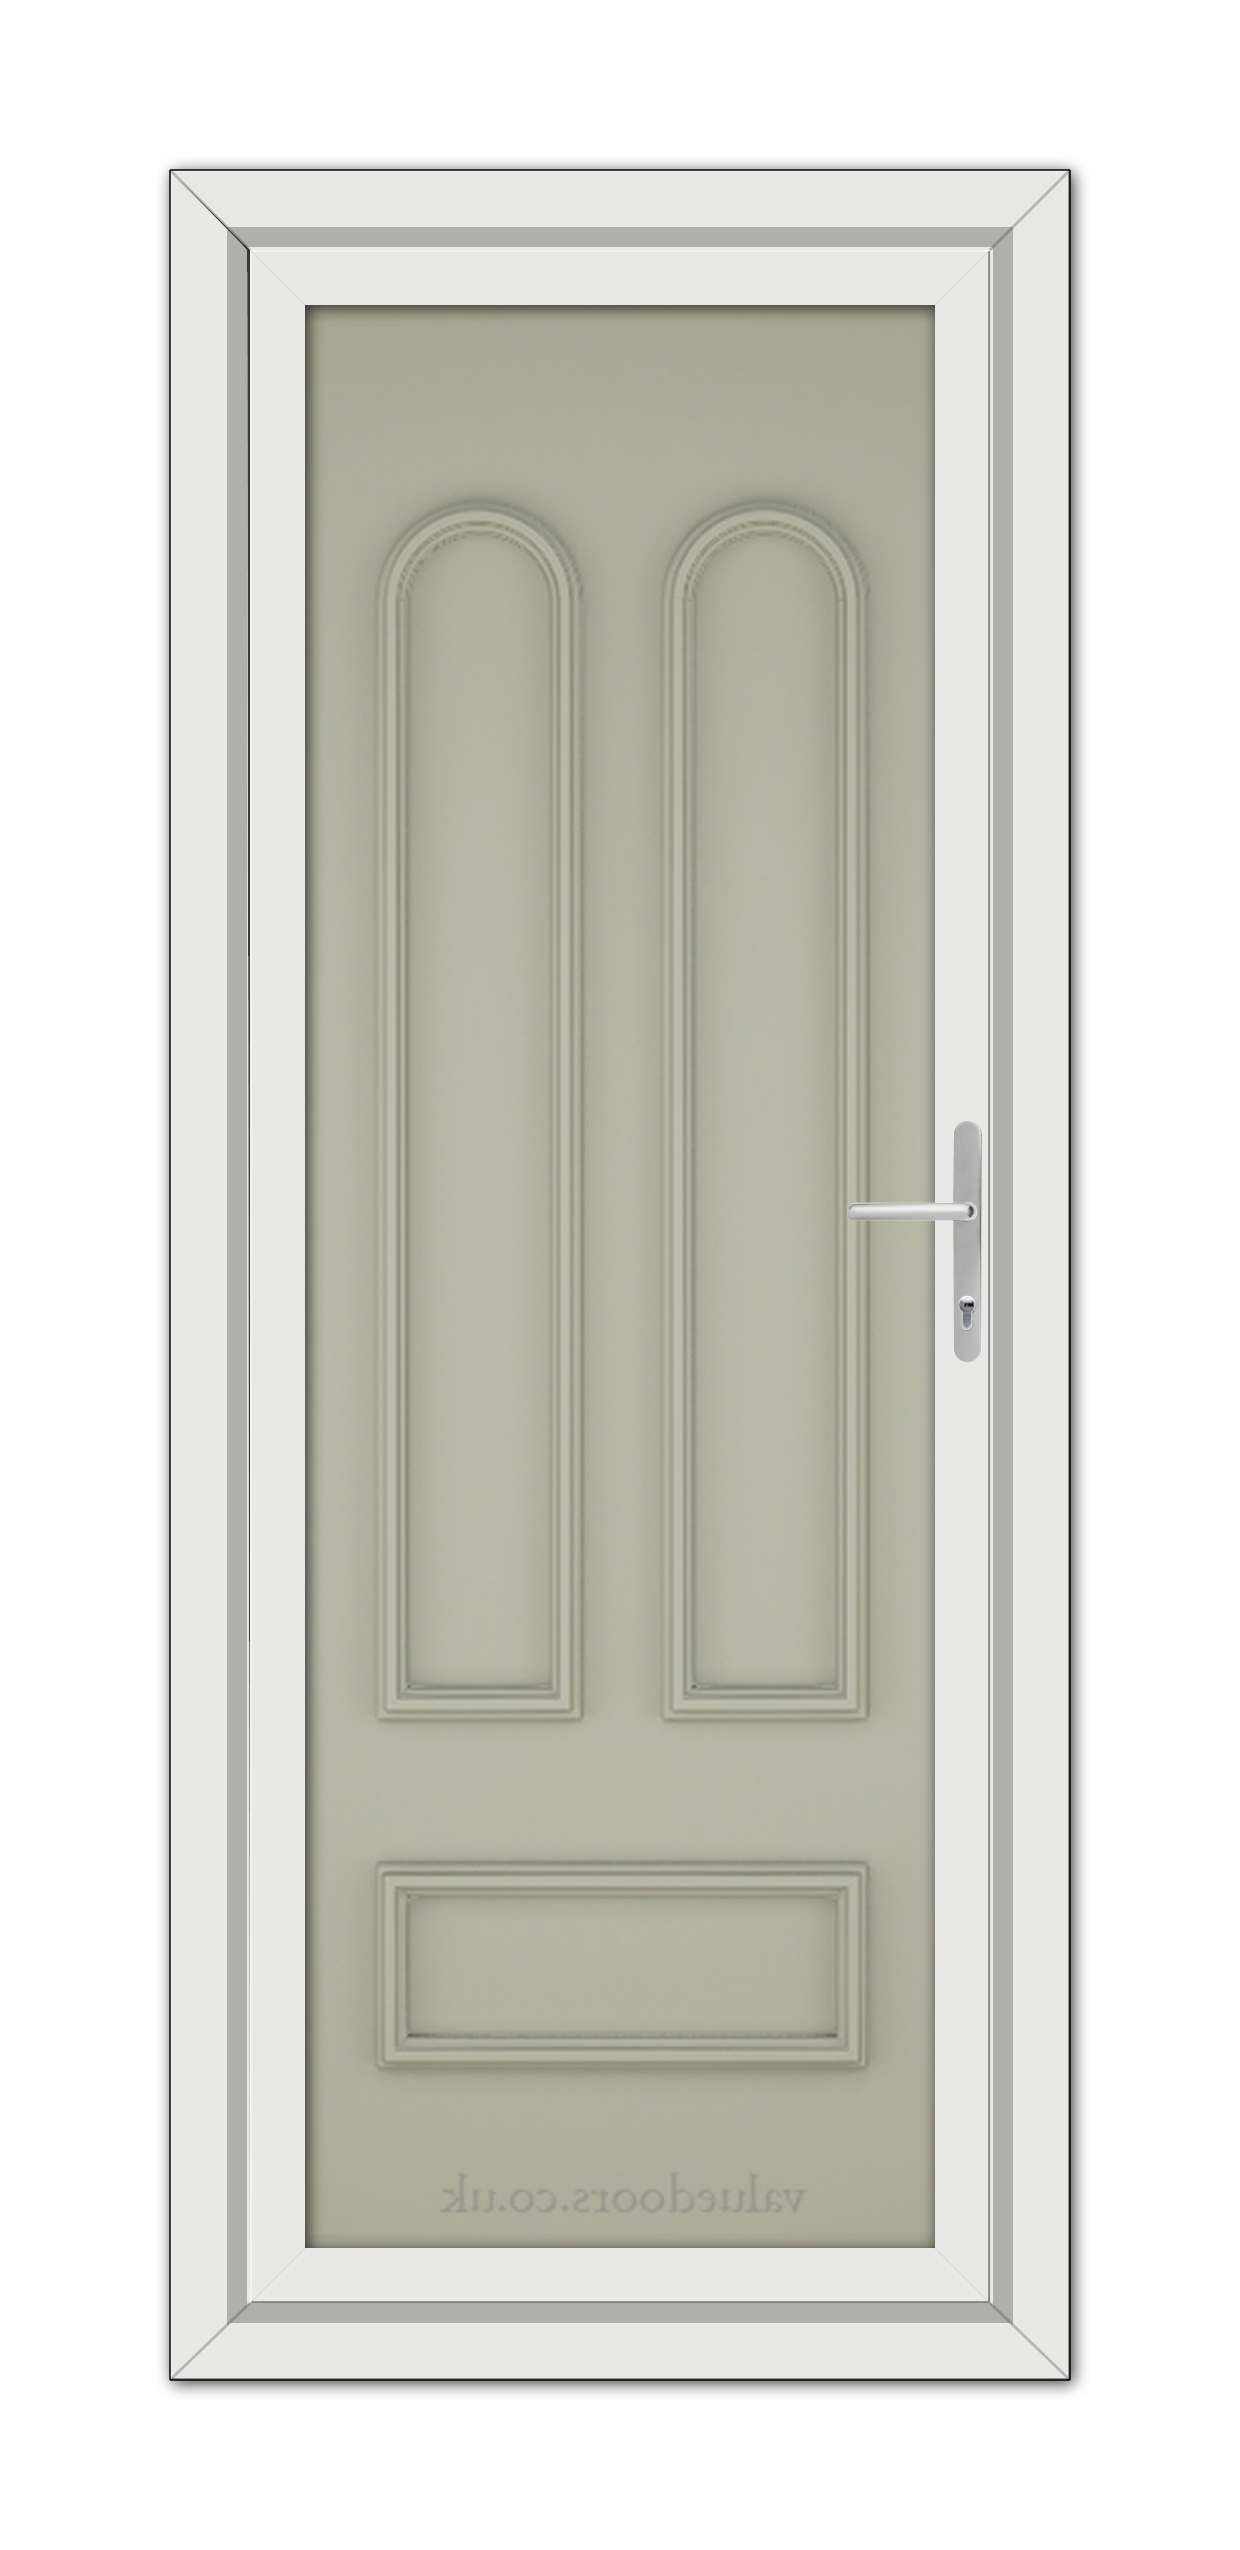 A Agate Grey Madrid Solid uPVC Door with two vertical panels and a silver handle, set within a white frame.